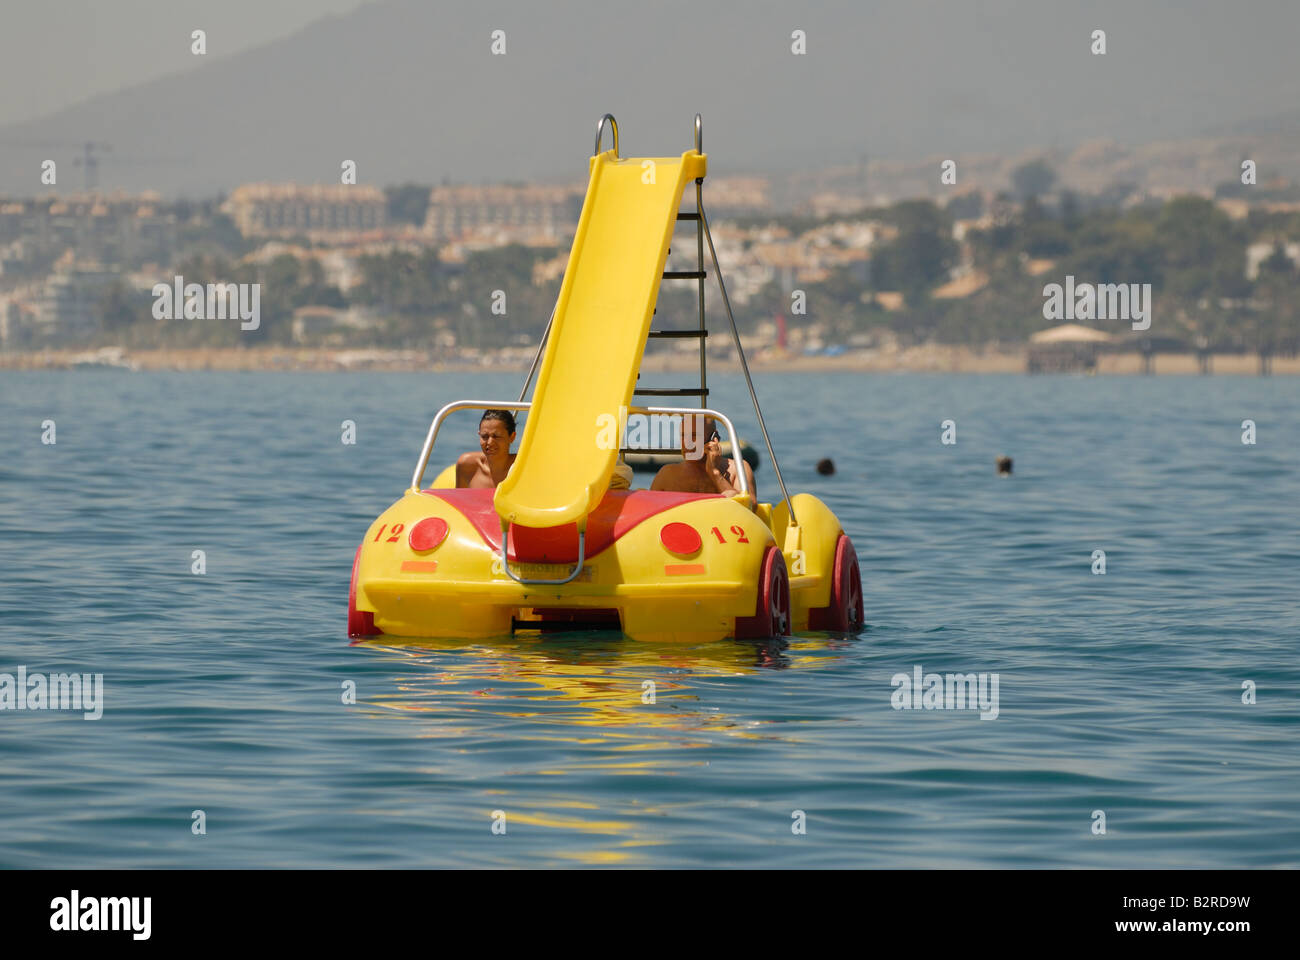 Man and a woman in VW Beetle shaped pedal boat with slide attatched, with man talking on mobile phone Stock Photo